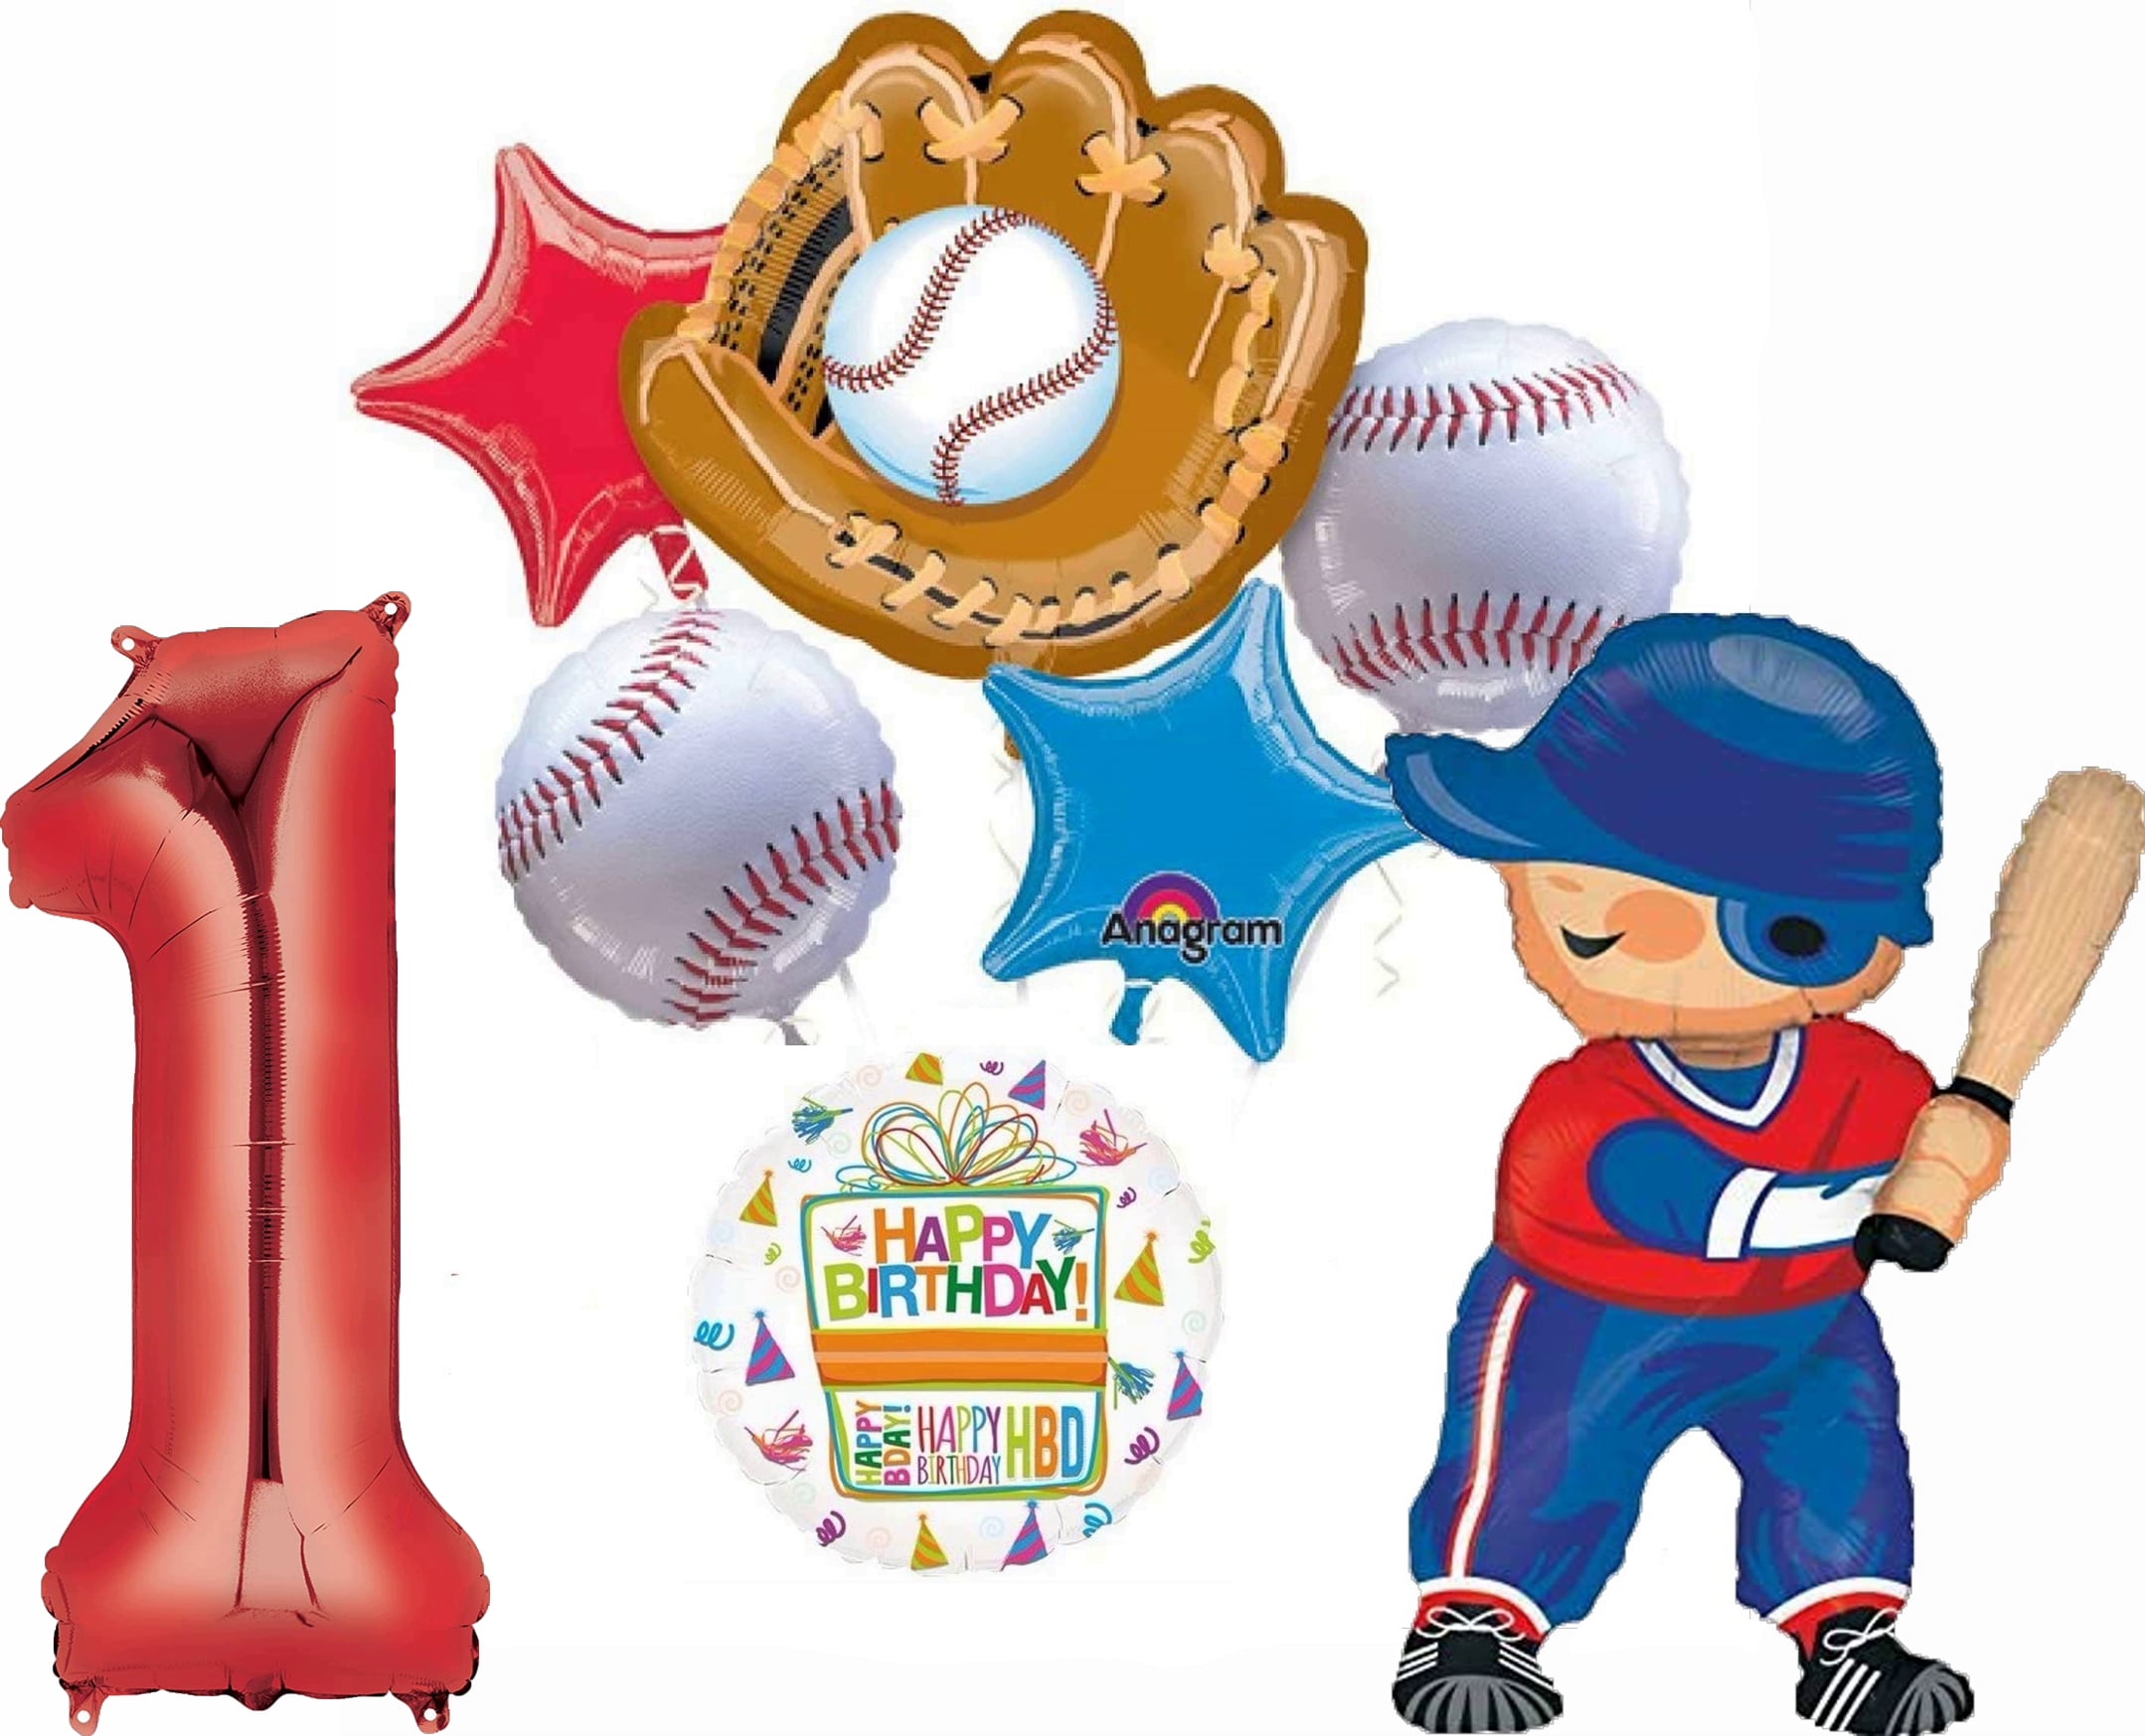 Anagram Baseball Balloons Birthday Party Balloons Bouquet Decorations Supplies Baseball Player Party